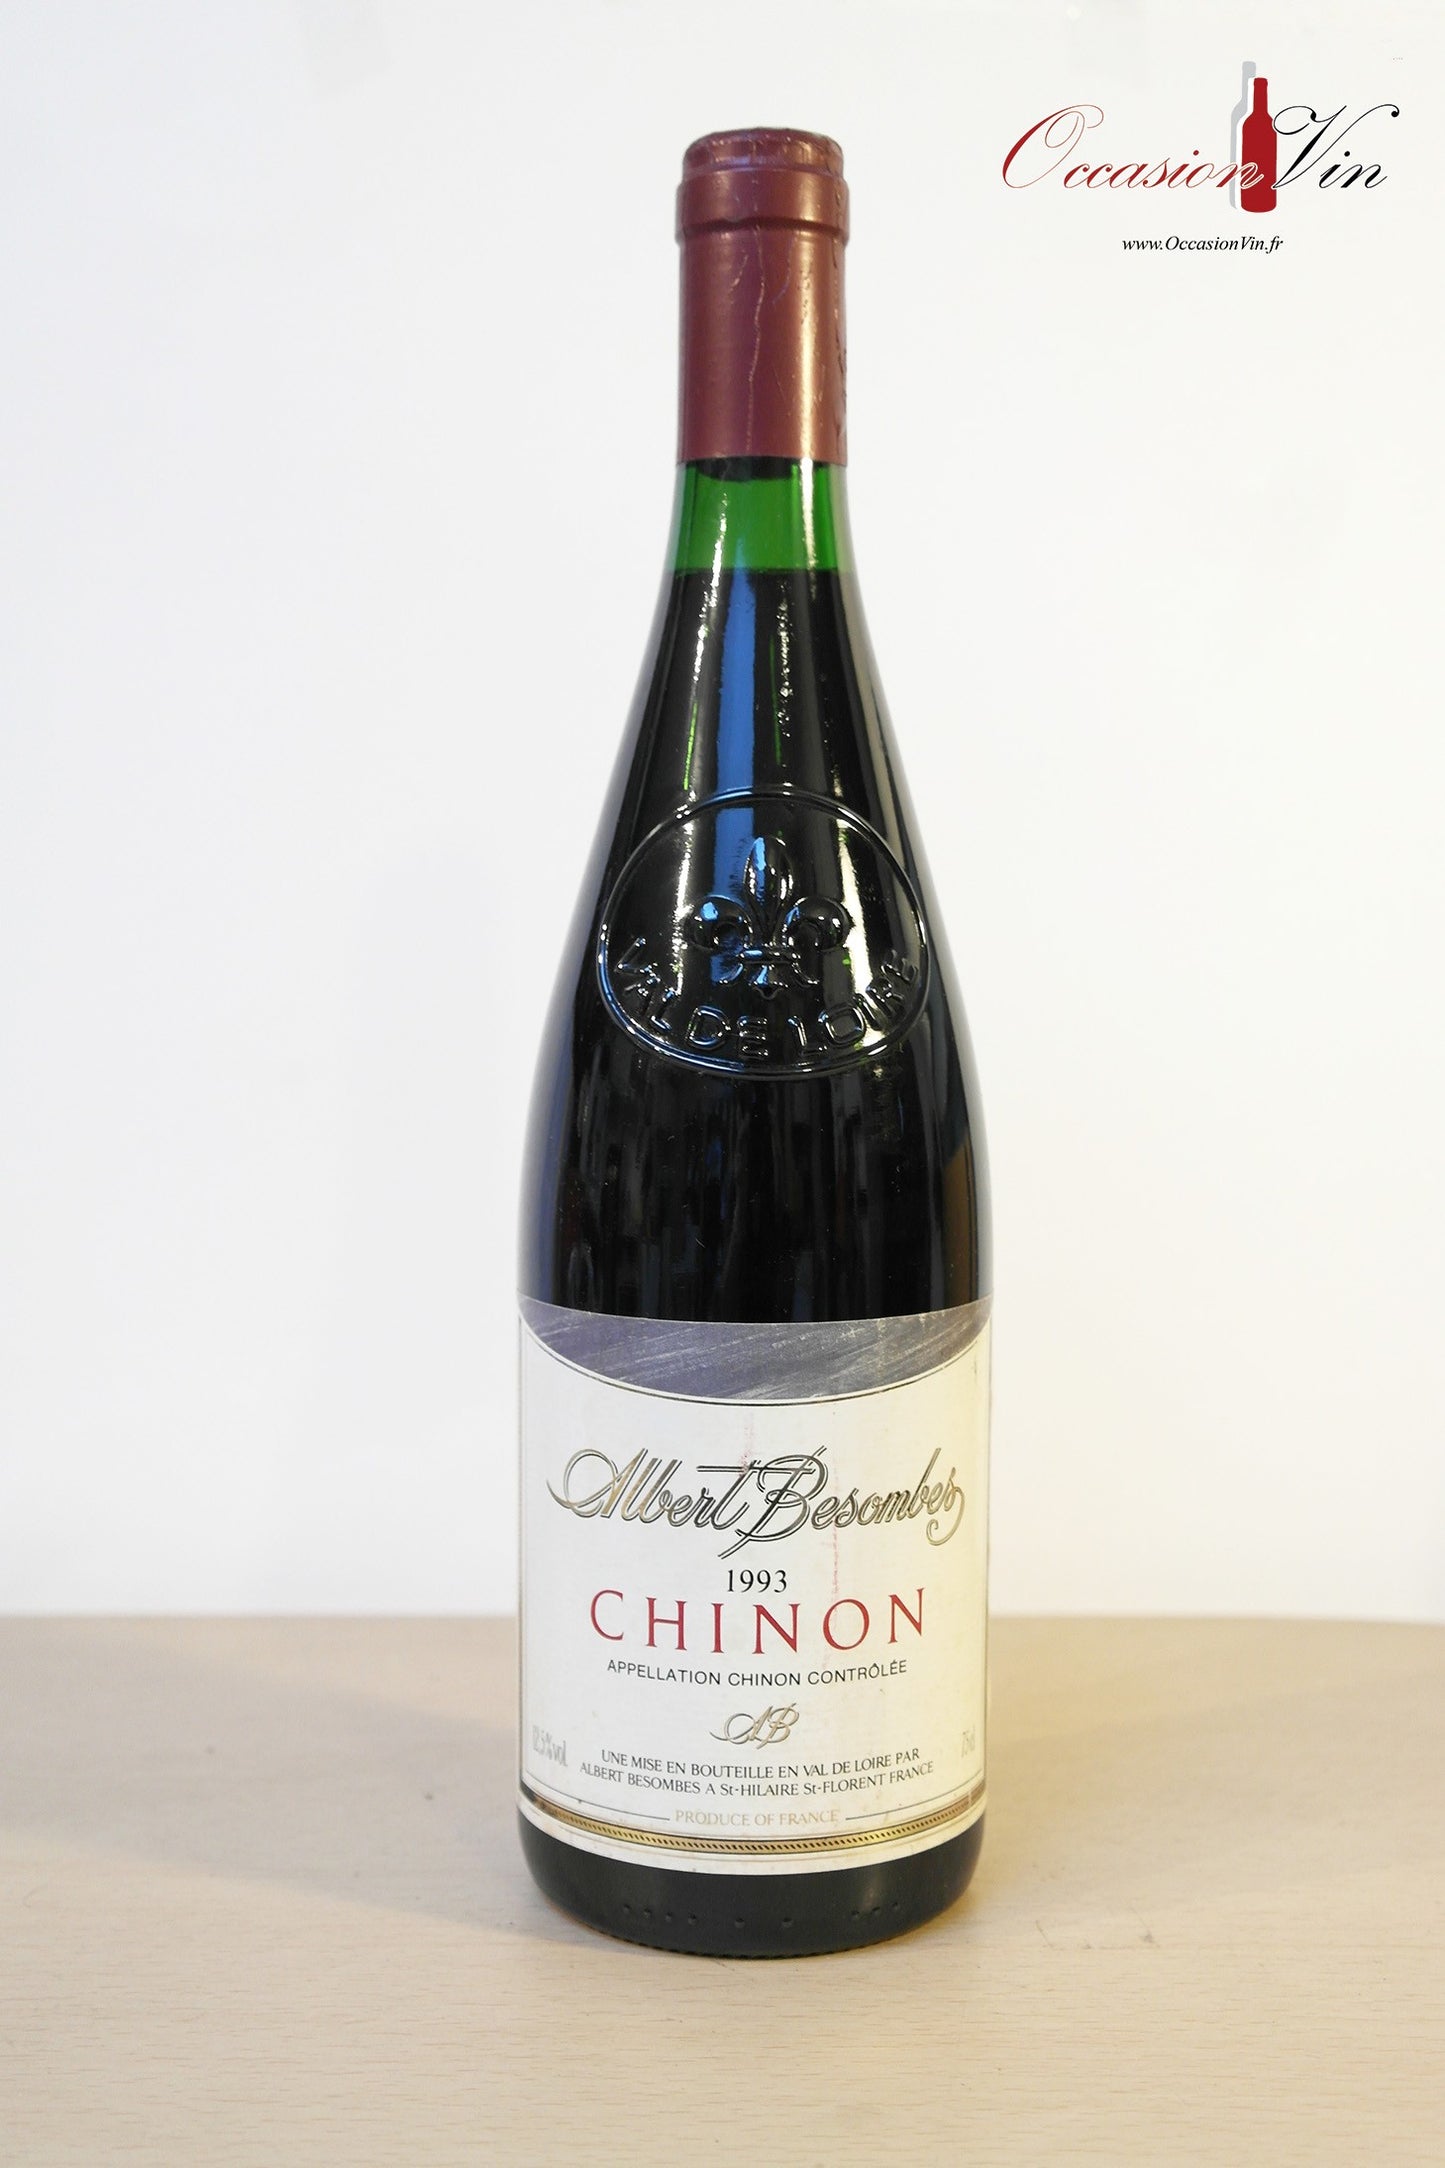 Chinon Besombes Vin 1993